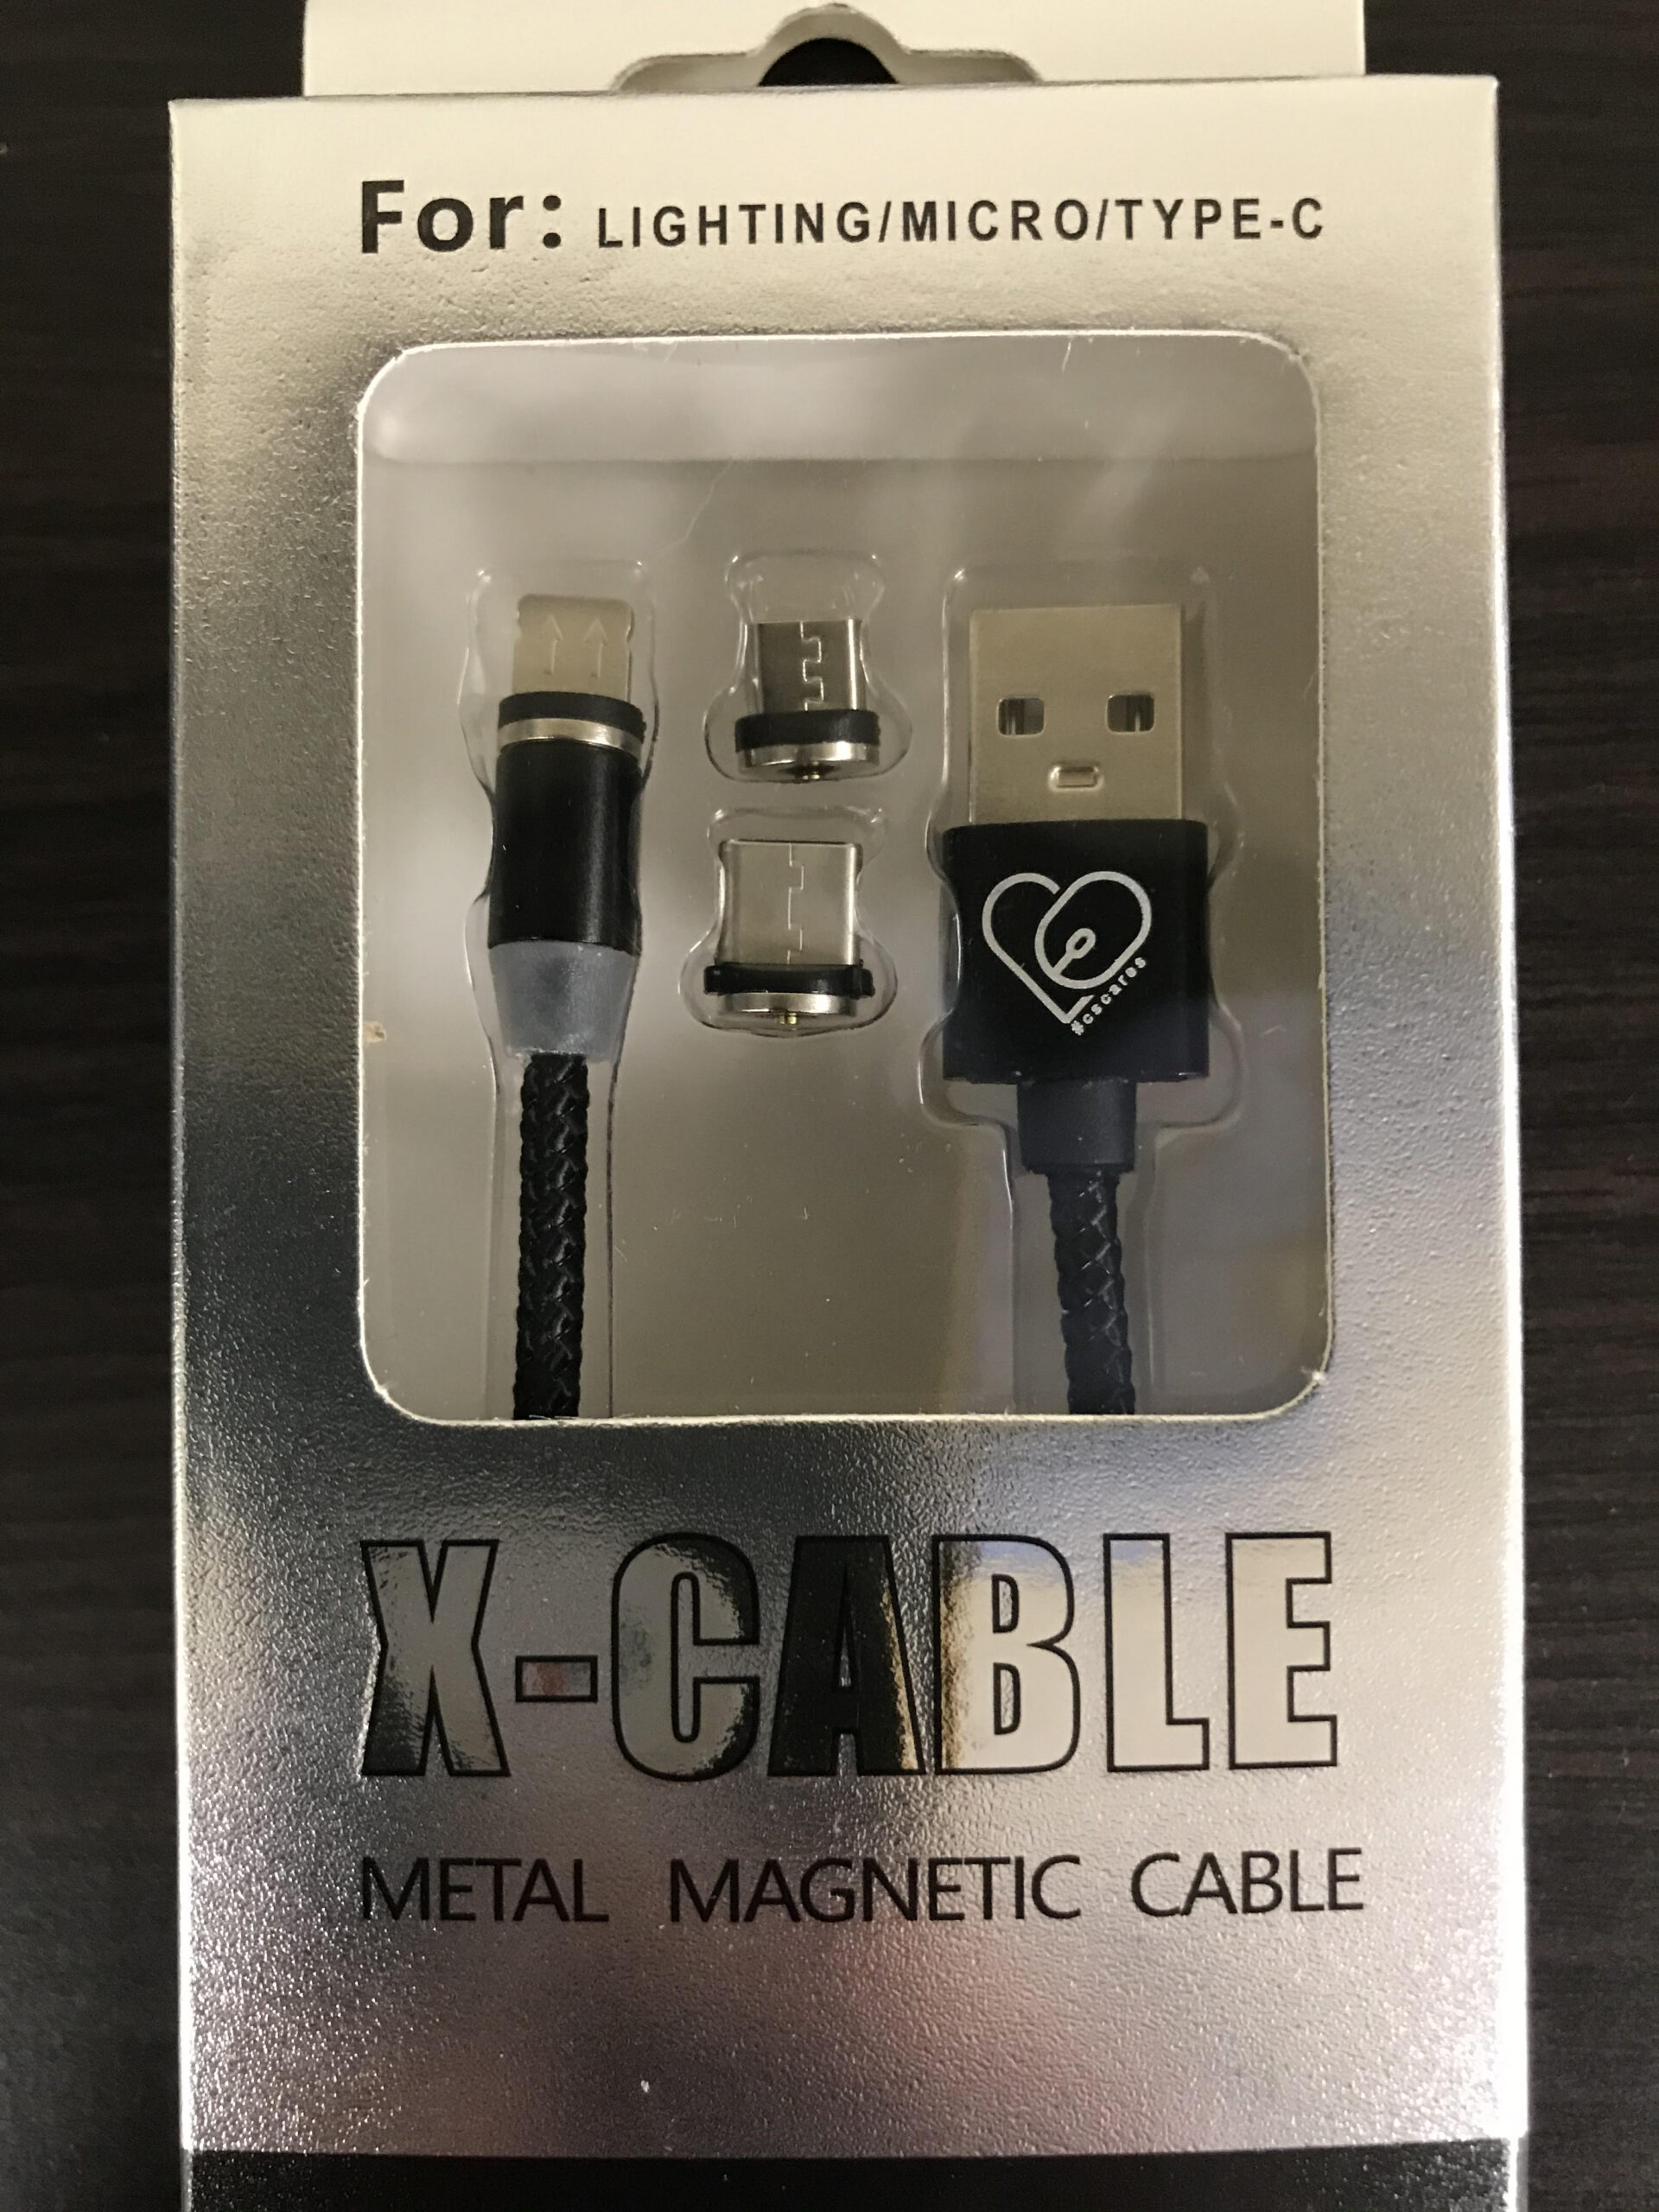 The X-cable